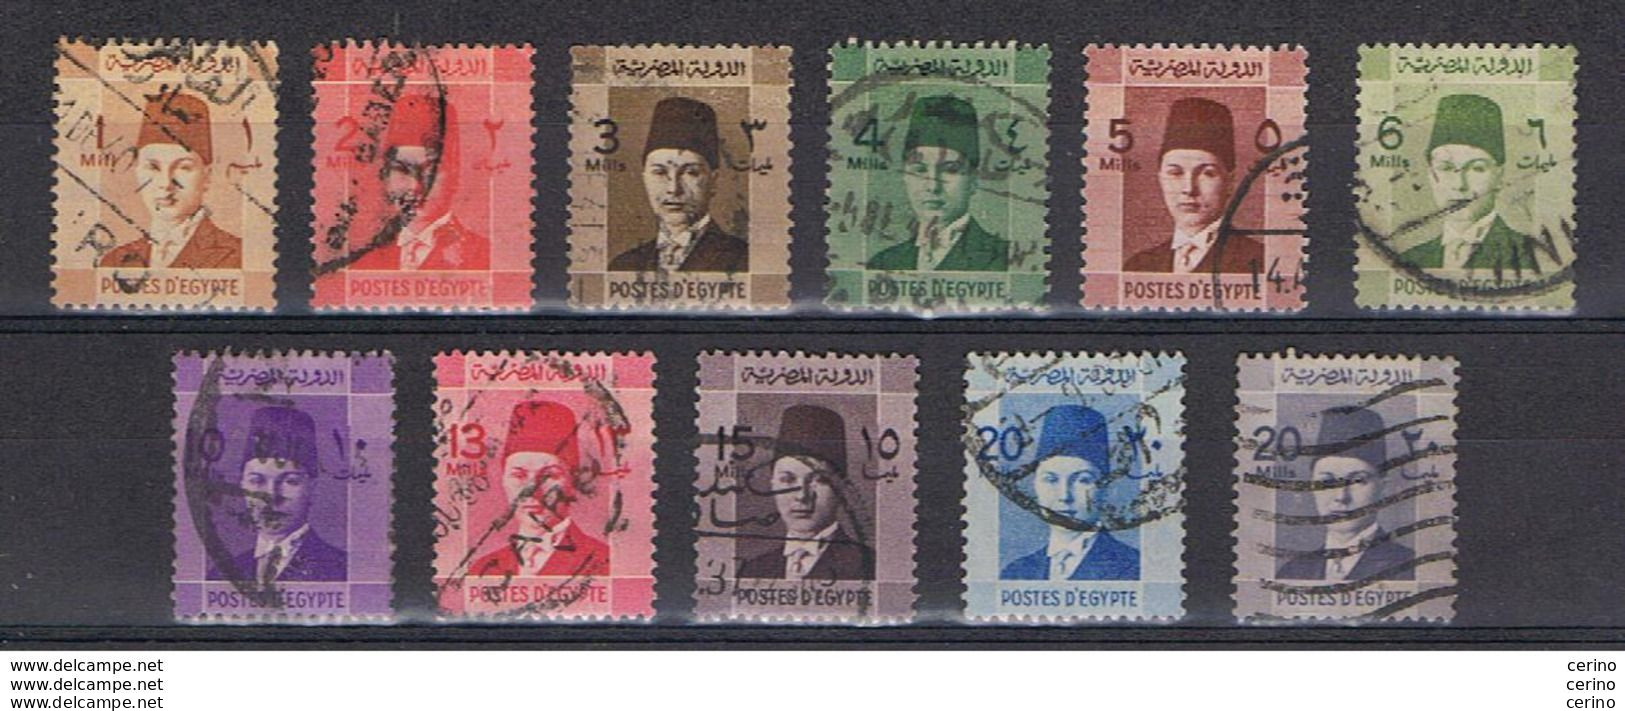 EGYPT:  1937/44  FAROUK  -  KOMPLET  SET  11  USED  STAMPS  -  YV/TELL. 187/95 A - Usati